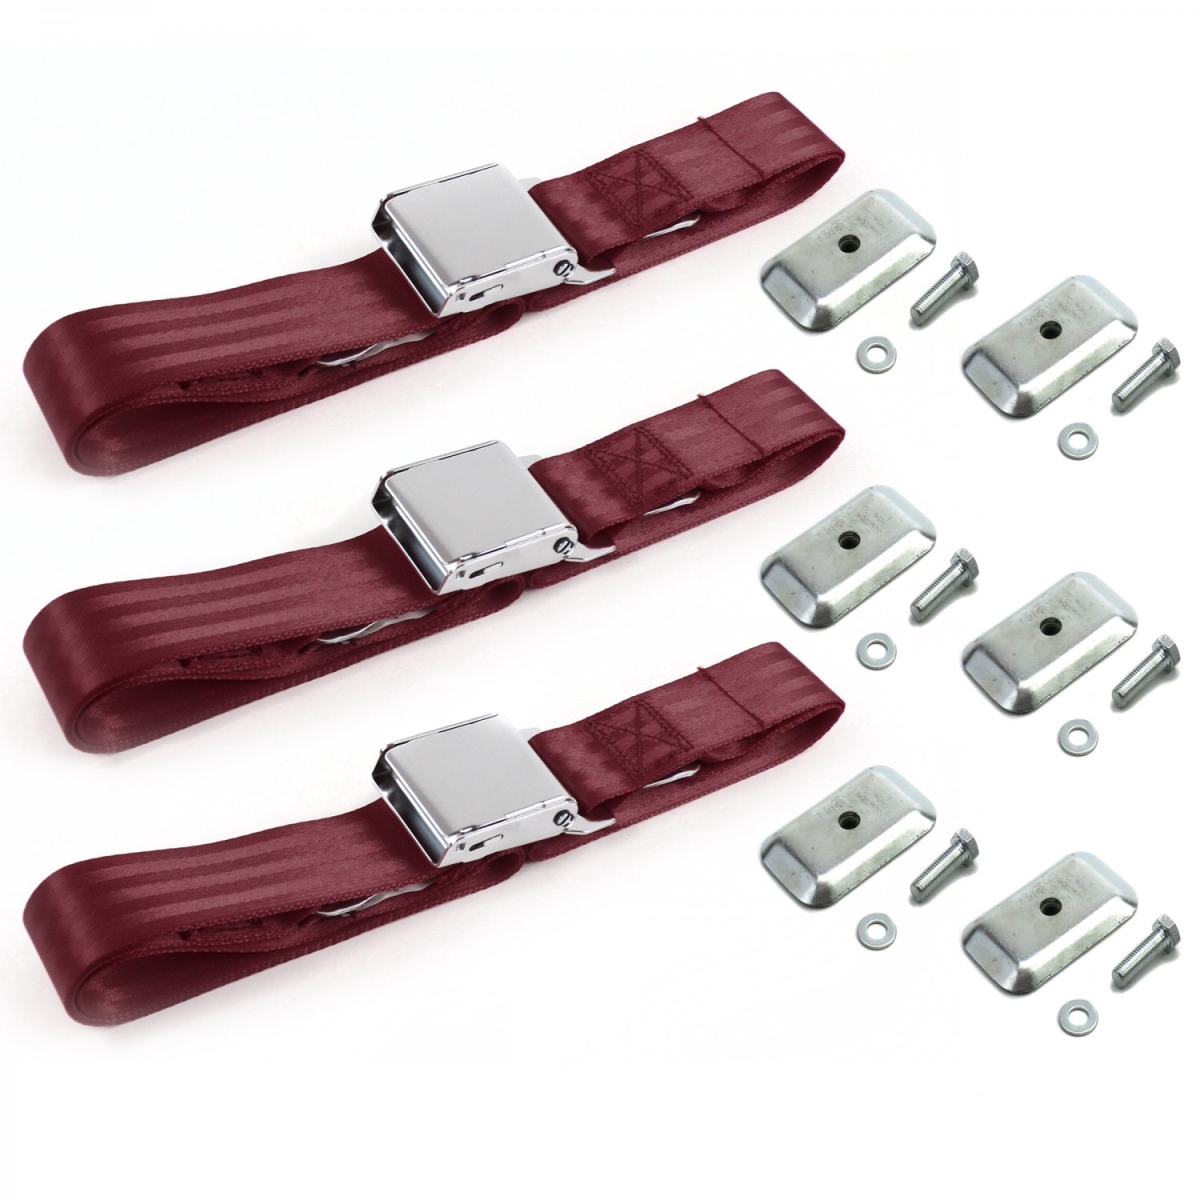 679803 Chevy S10 Blazer 1982-1994 Airplane 2 Point Burgandy Lap Bench Seat Belt Kit with Bracketry - 3 Belts -  safeTboy